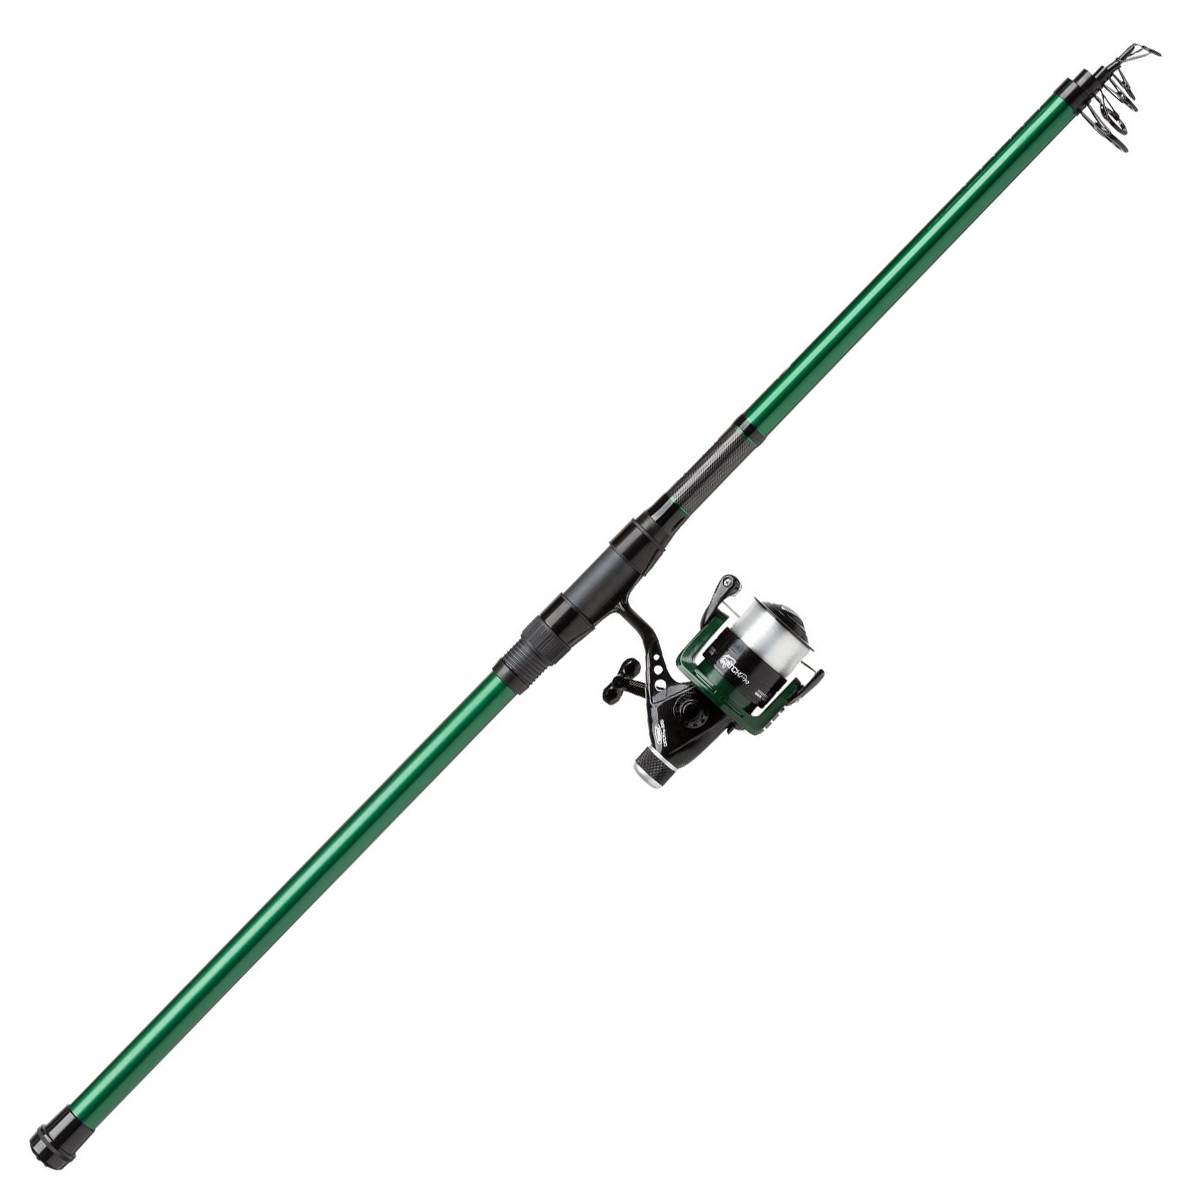 Mitchell Catch Pro Tele Strong Combo 3,50m (80-150g) - Mitchell Catch Pro Tele Strong Combo RD